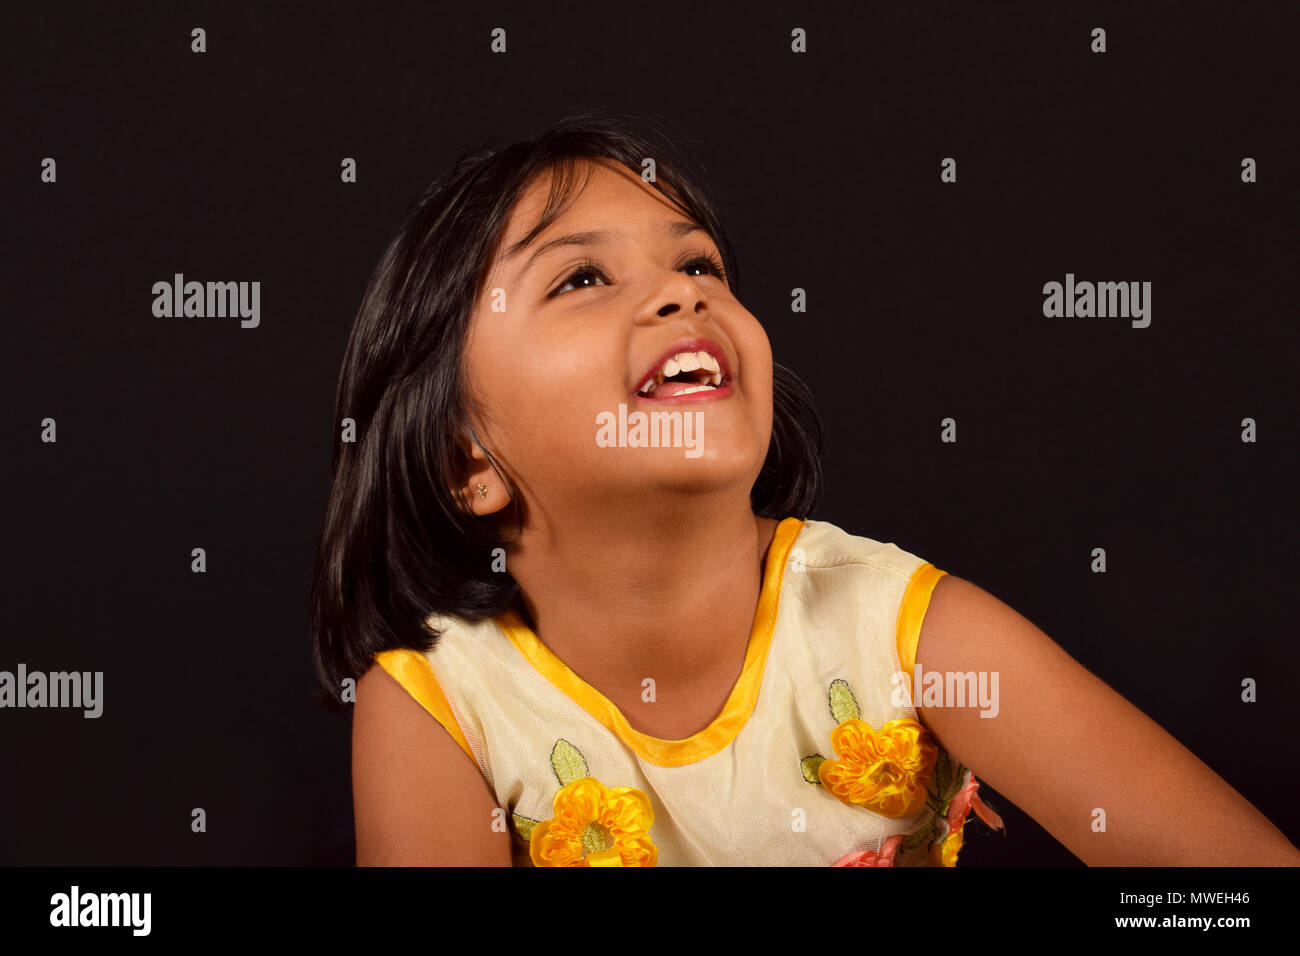 Little girl with a cute smile looking at camera against a black backdrop, Pune Stock Photo